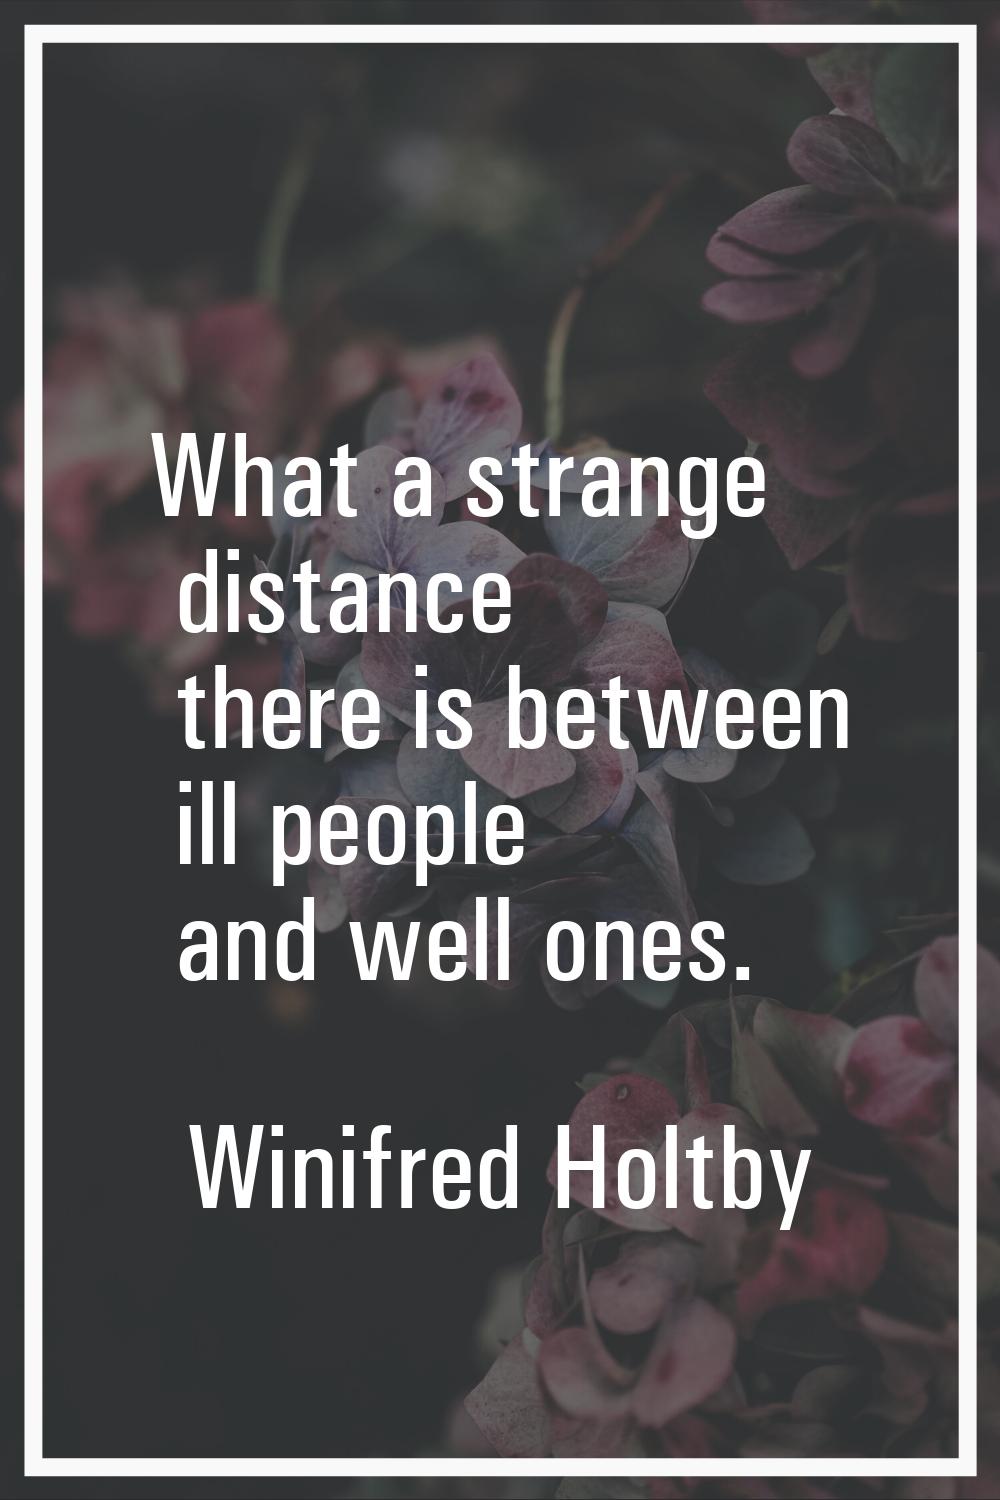 What a strange distance there is between ill people and well ones.